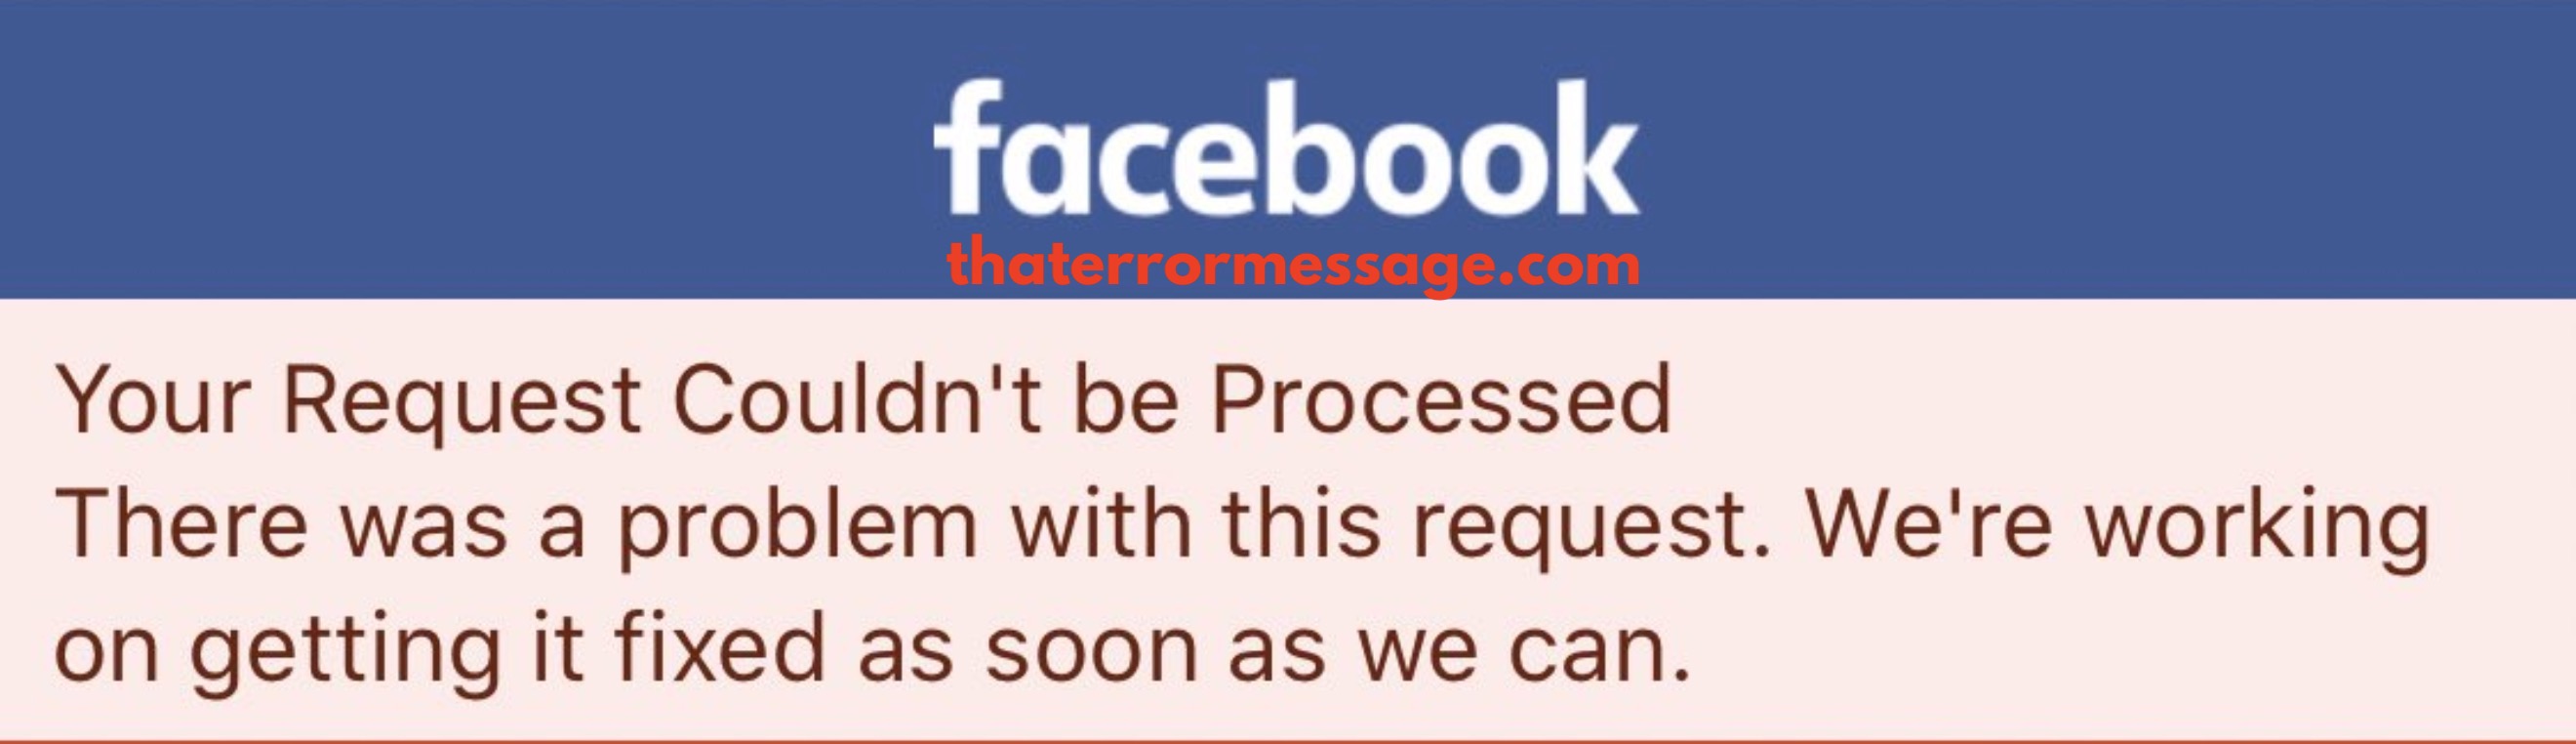 Request Couldnt Be Processed Facebook